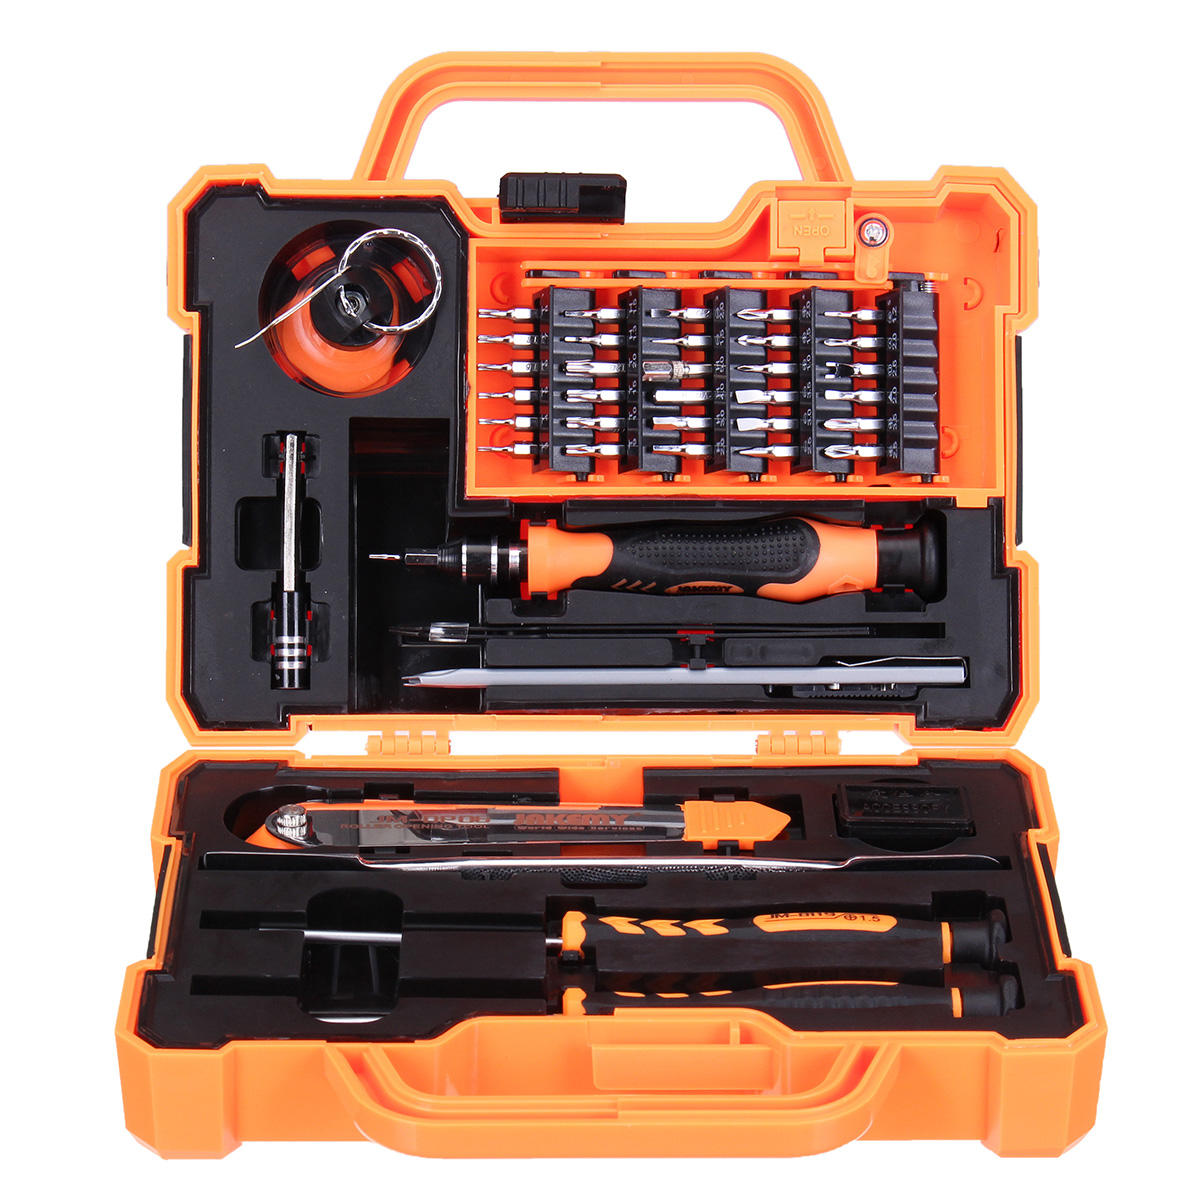 

JAKEMY JM-8139 45 in 1 Professional Electronic Precision Screwdriver Set Household Repair Tool kit